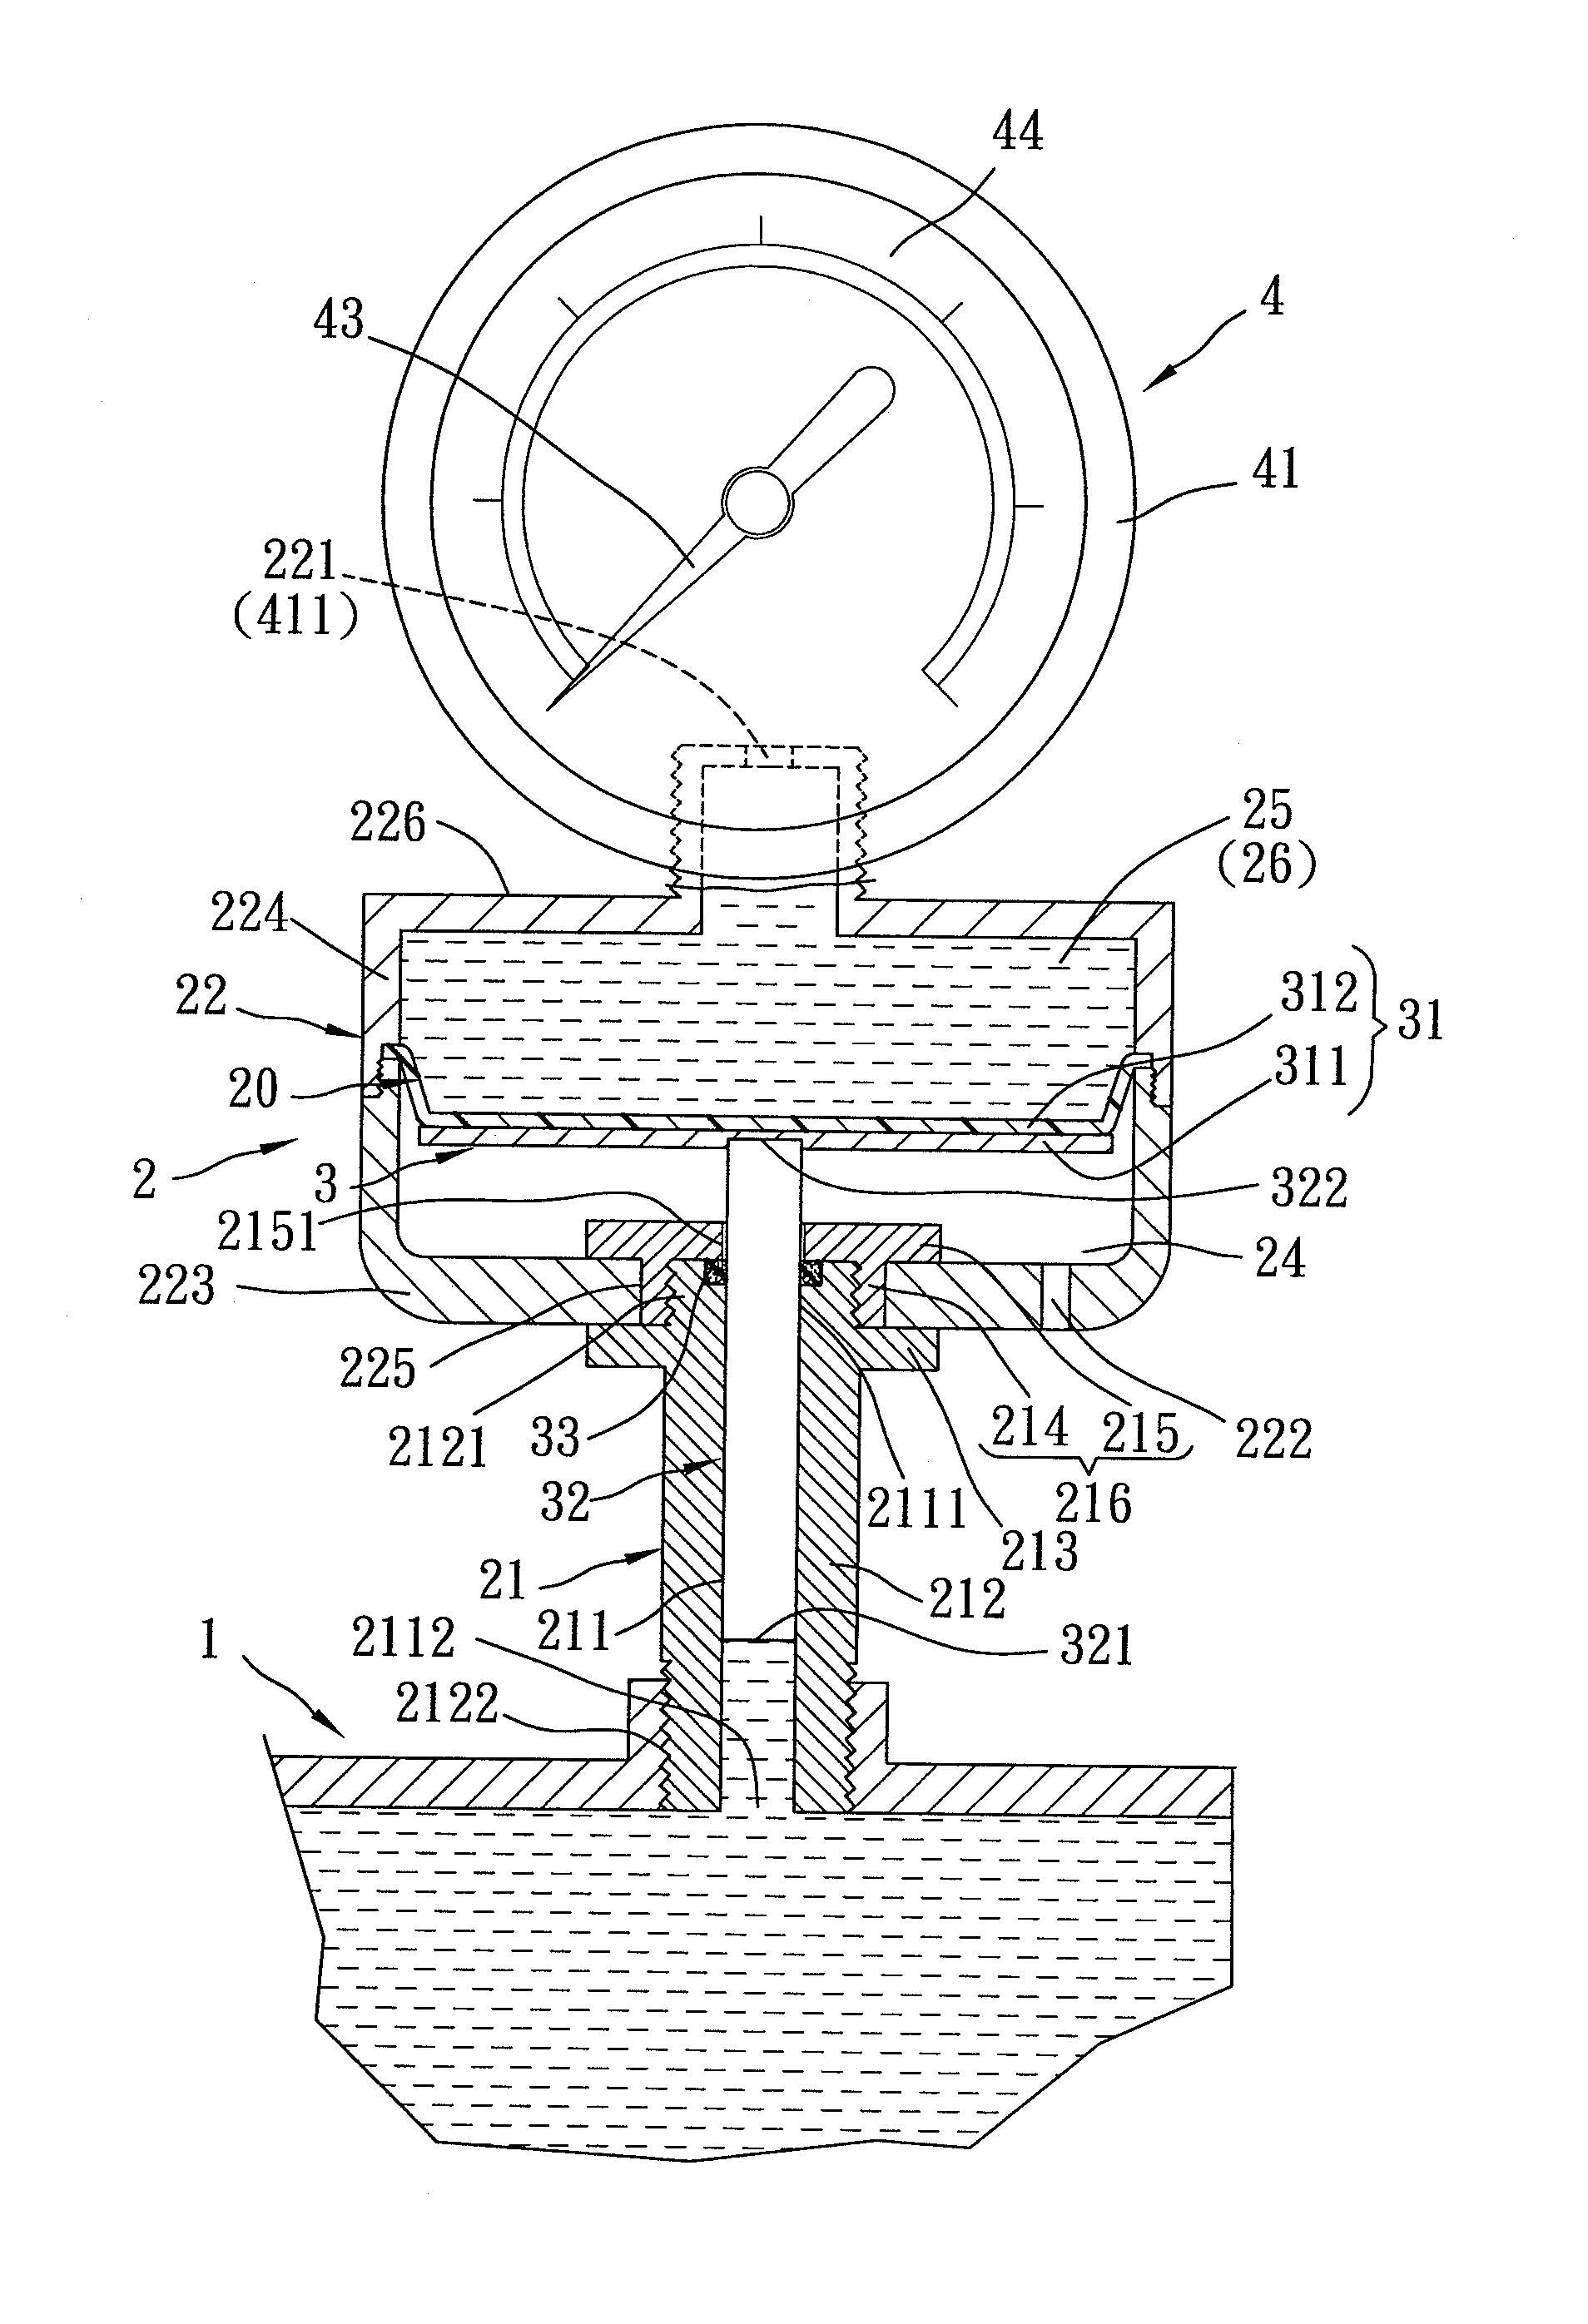 Manometer with a Pressure Transforming Device